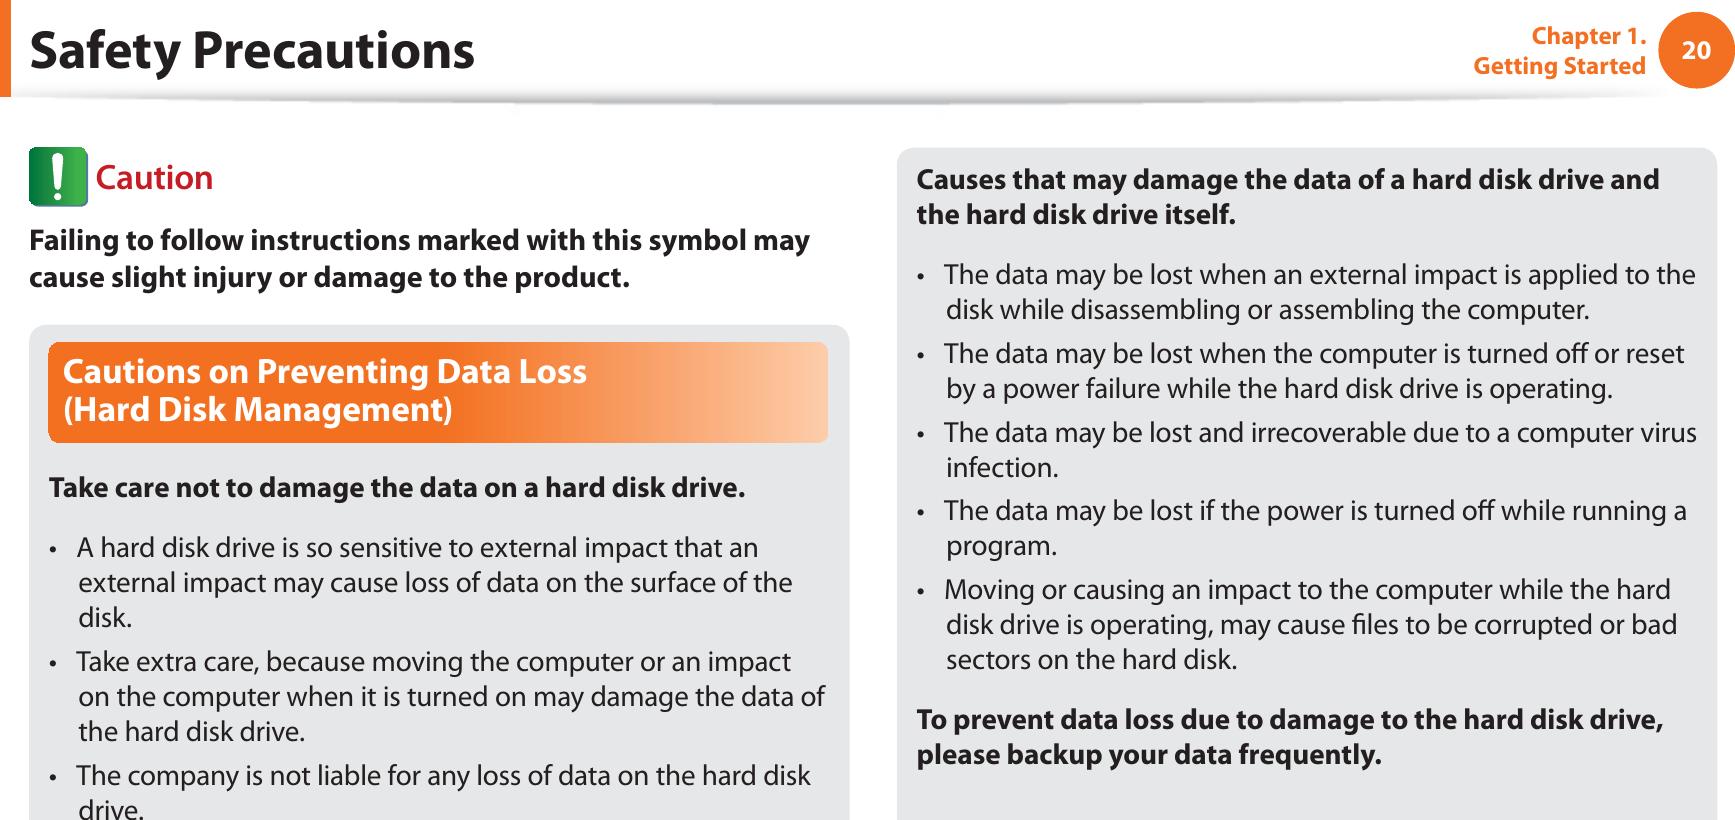 20Chapter 1. Getting StartedCautions on Preventing Data Loss  (Hard Disk Management)Take care not to damage the data on a hard disk drive.A hard disk drive is so sensitive to external impact that an t external impact may cause loss of data on the surface of the disk.Take extra care, because moving the computer or an impact t on the computer when it is turned on may damage the data of the hard disk drive.The company is not liable for any loss of data on the hard disk t drive.Causes that may damage the data of a hard disk drive and the hard disk drive itself.The data may be lost when an external impact is applied to the t disk while disassembling or assembling the computer.The data may be lost when the computer is turned o or reset t by a power failure while the hard disk drive is operating.The data may be lost and irrecoverable due to a computer virus t infection.The data may be lost if the power is turned o while running a t program.Moving or causing an impact to the computer while the hard t disk drive is operating, may cause les to be corrupted or bad sectors on the hard disk.To prevent data loss due to damage to the hard disk drive, please backup your data frequently.Safety Precautions CautionFailing to follow instructions marked with this symbol may cause slight injury or damage to the product.